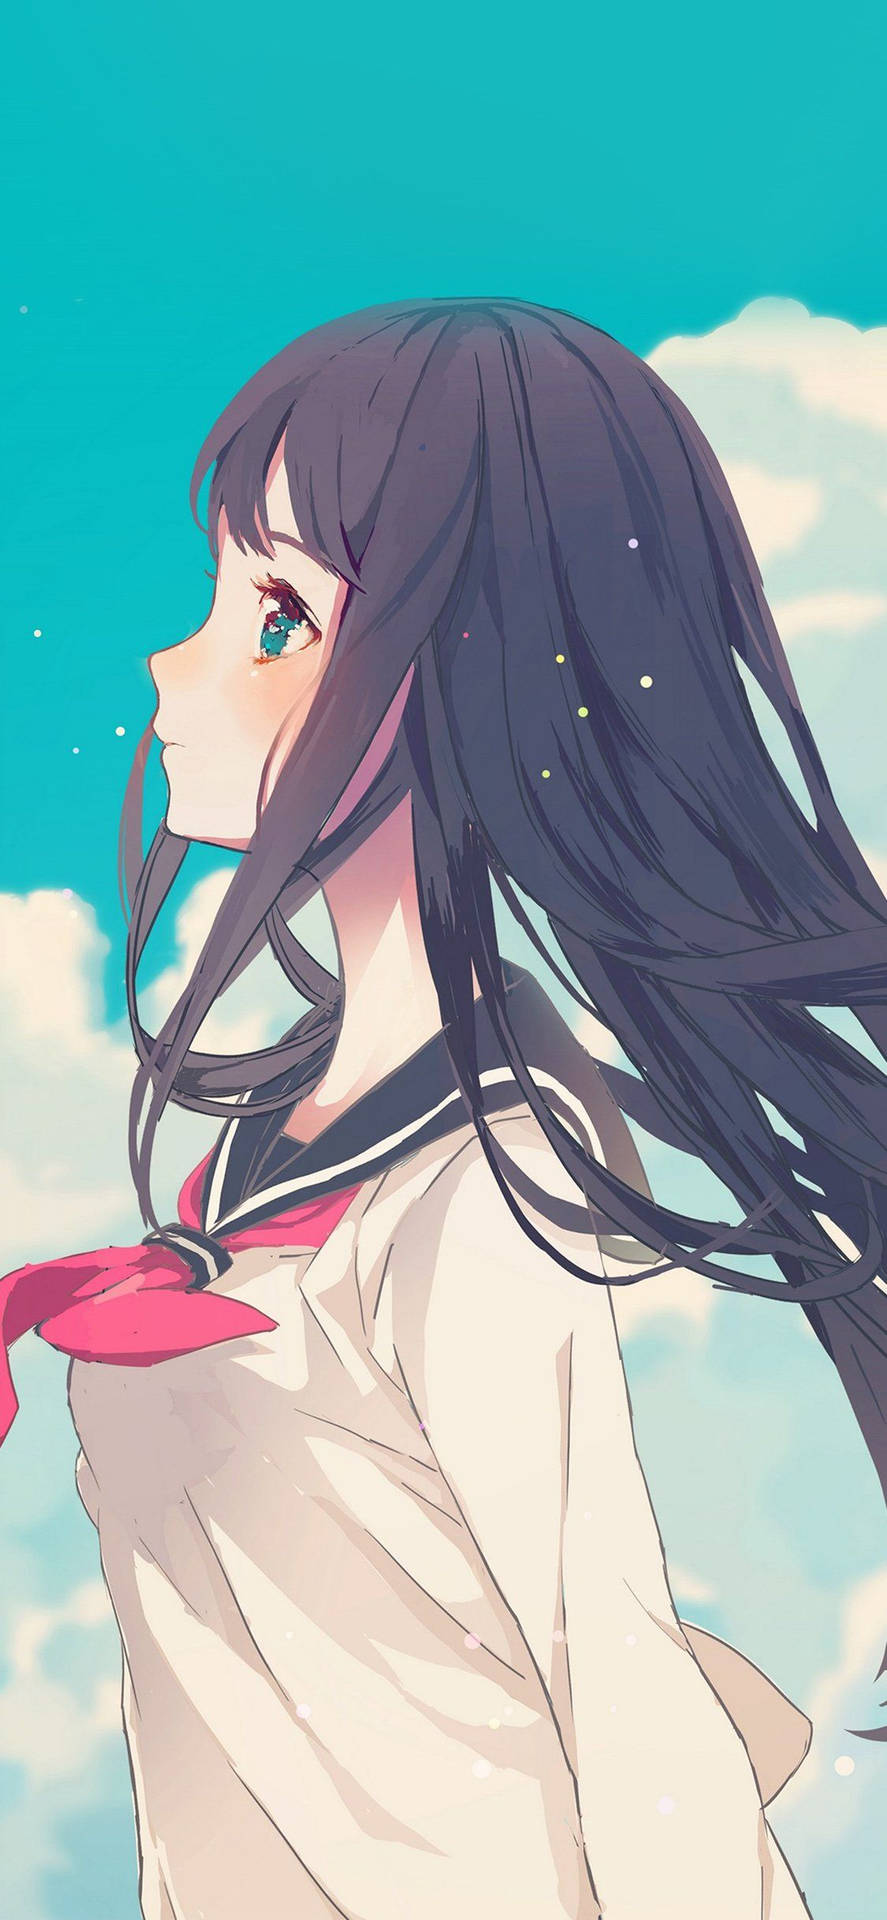 Download Side Profile Cute Anime Girl iPhone Wallpaper ...